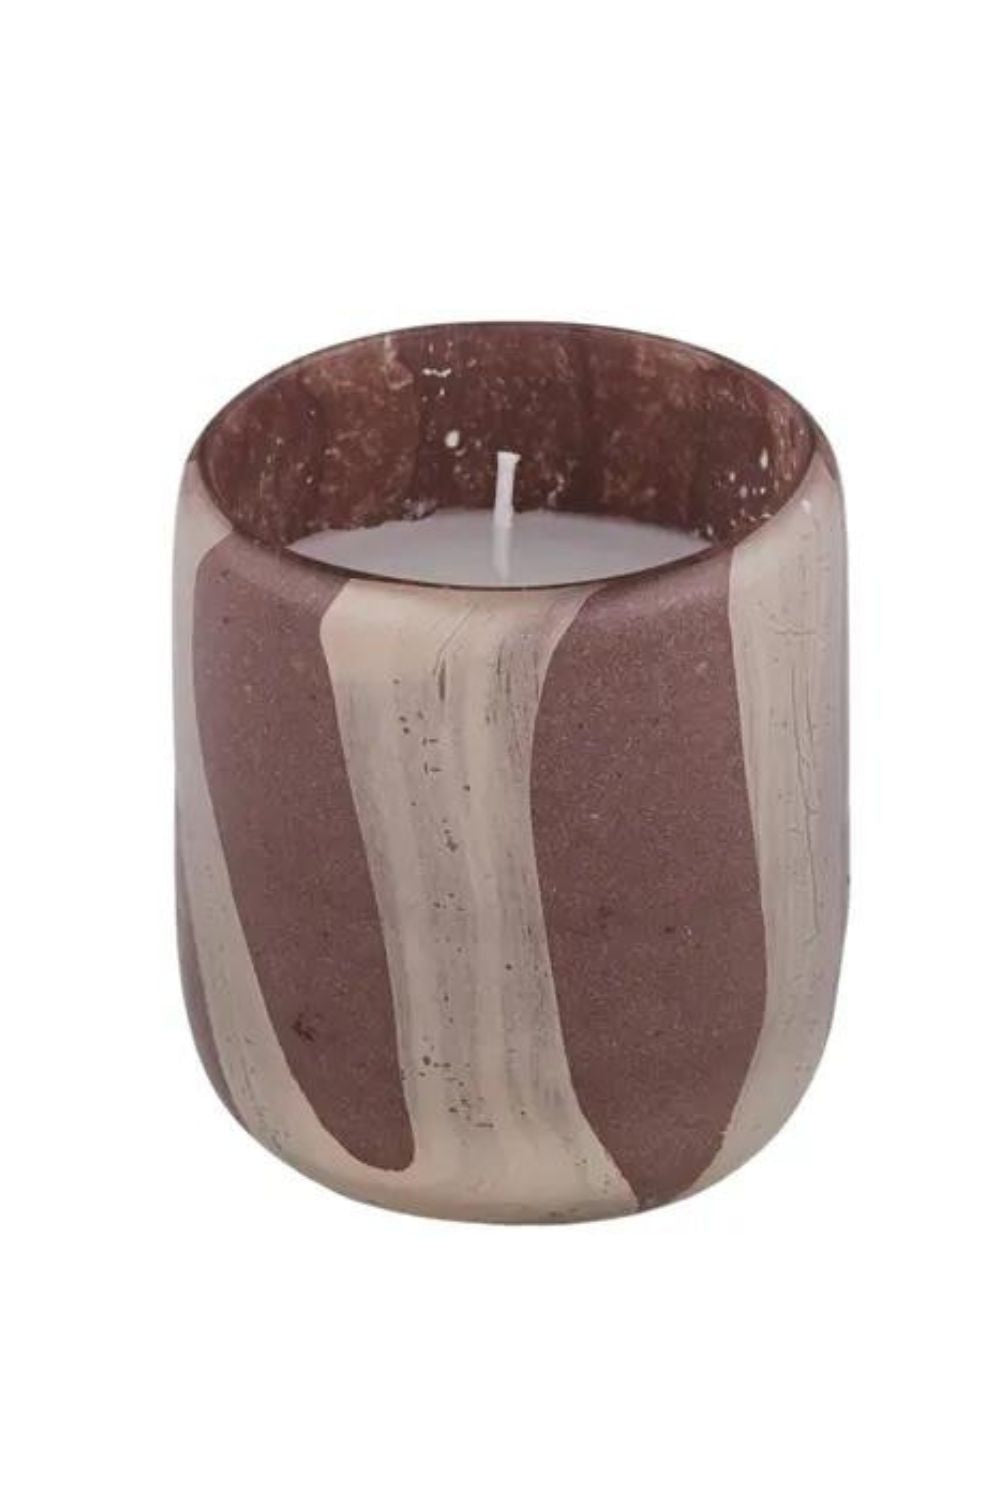 HAVEN GLASS CANDLE - NATURAL / TERRA